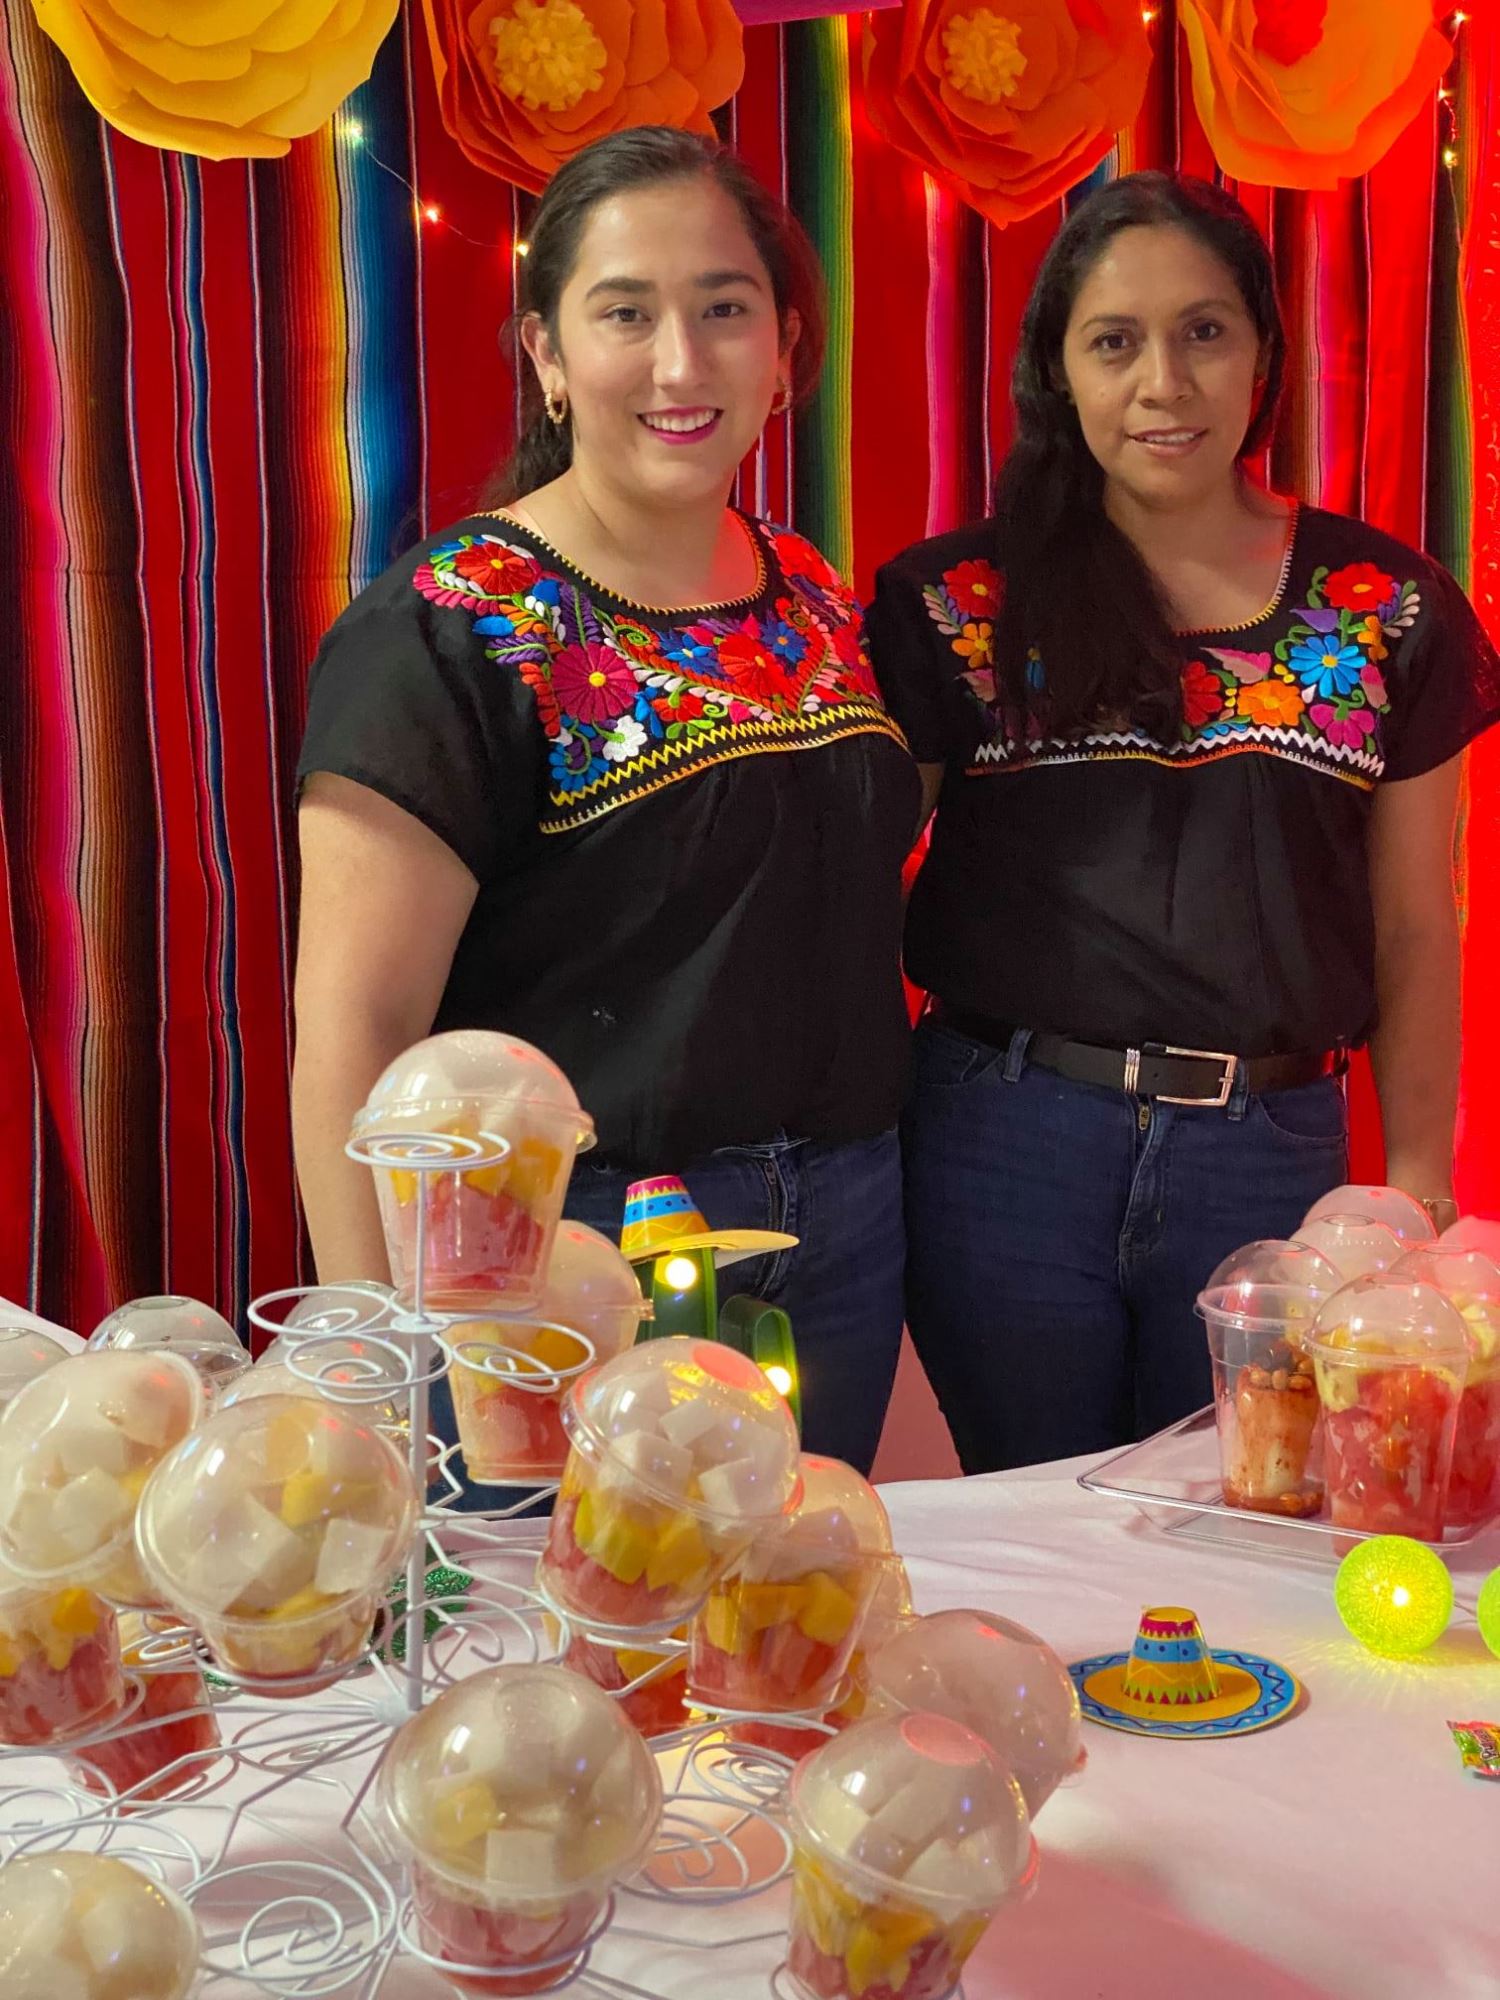 Two women pose with food in front of a festive background